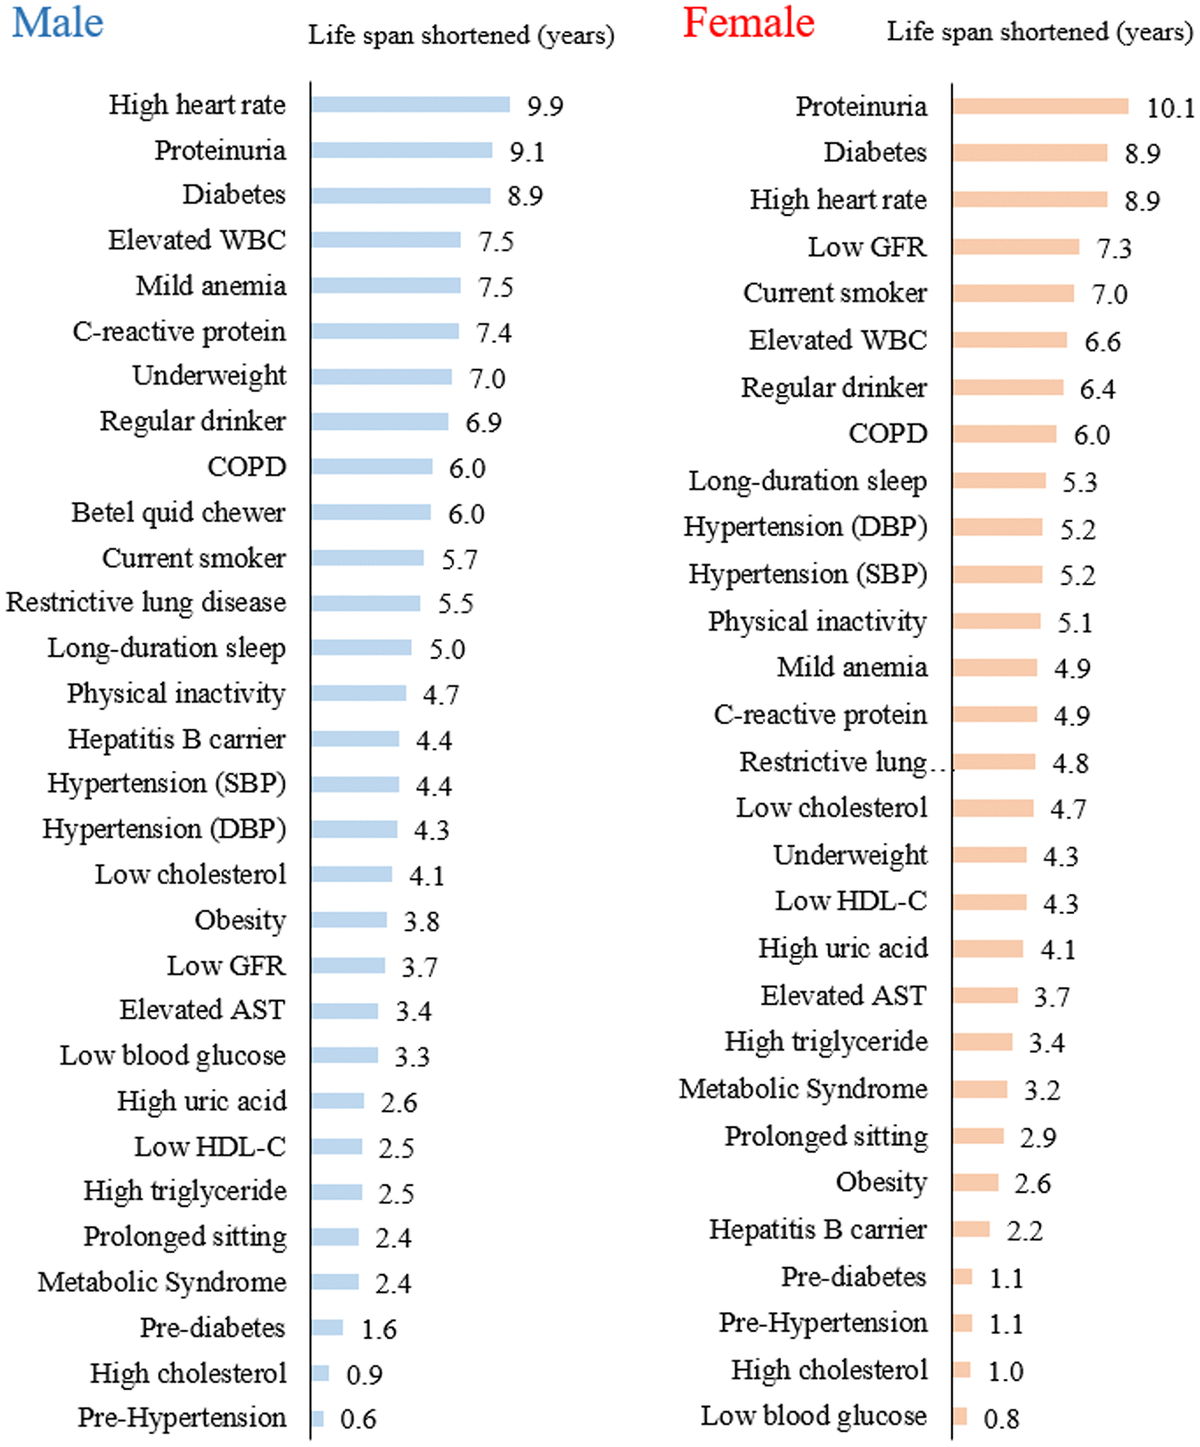 Years of life lost from each of the 30 health risks in men and women.